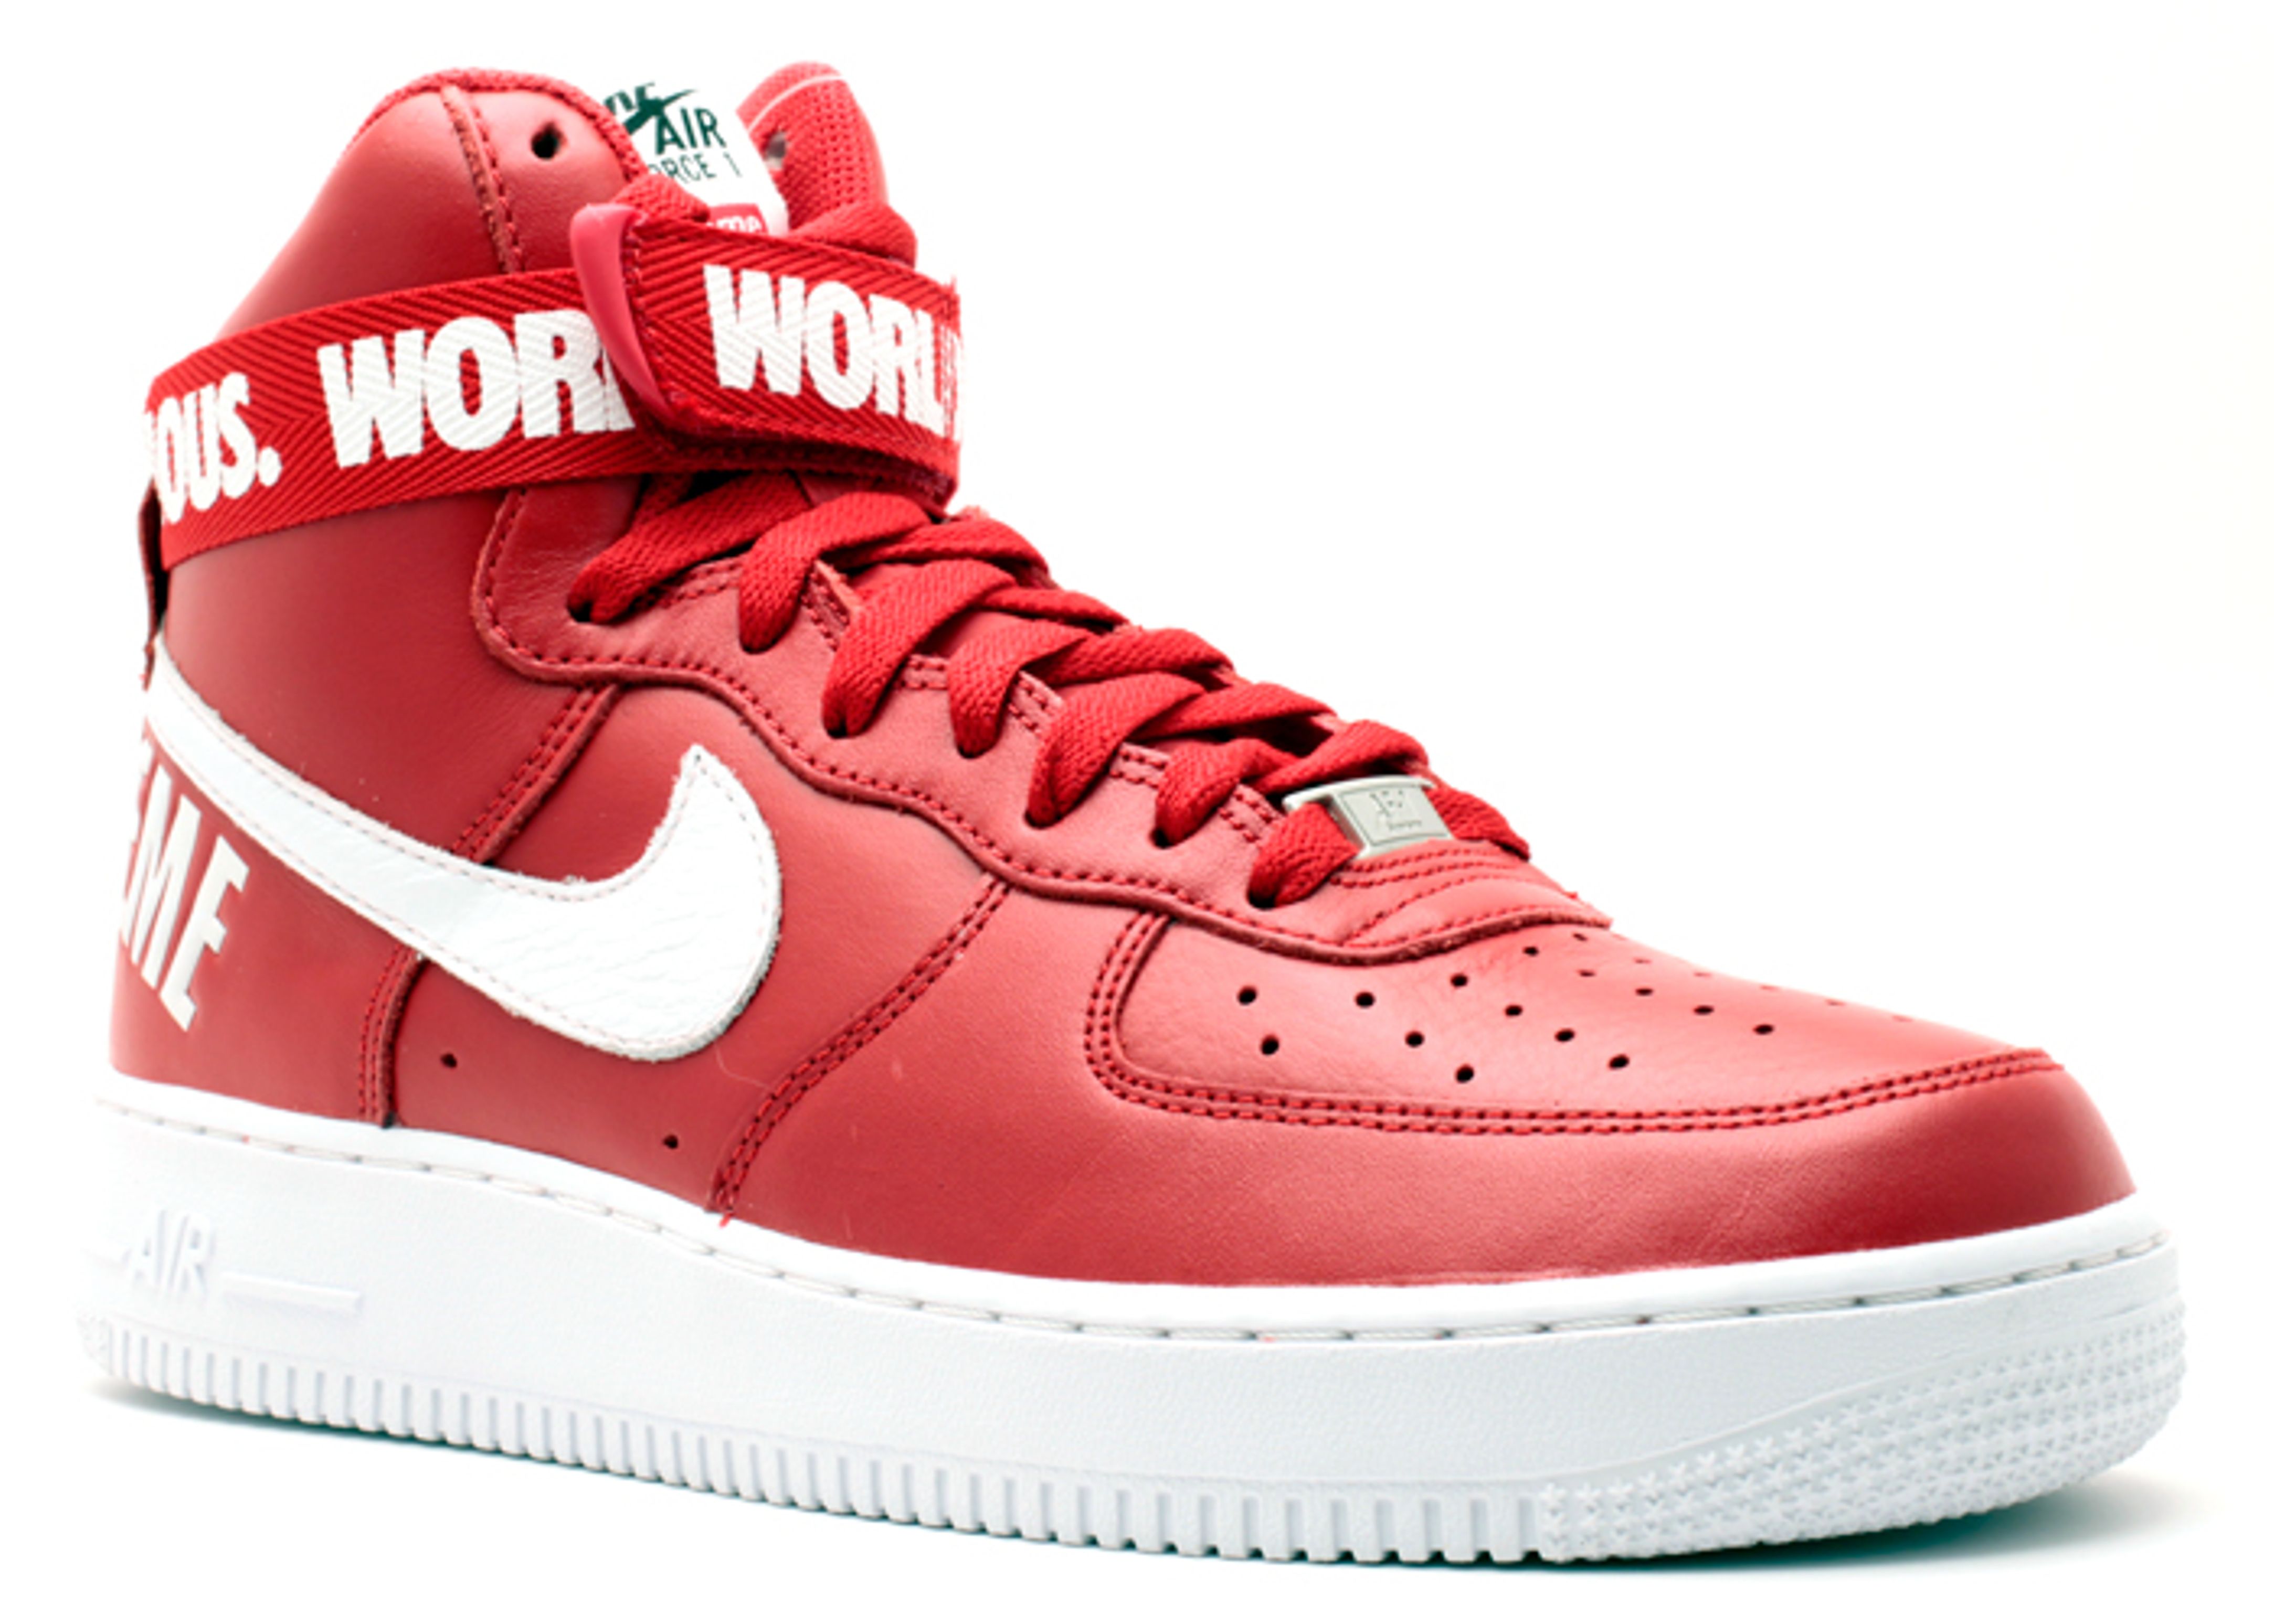 nike air force 1 high supreme world famous white